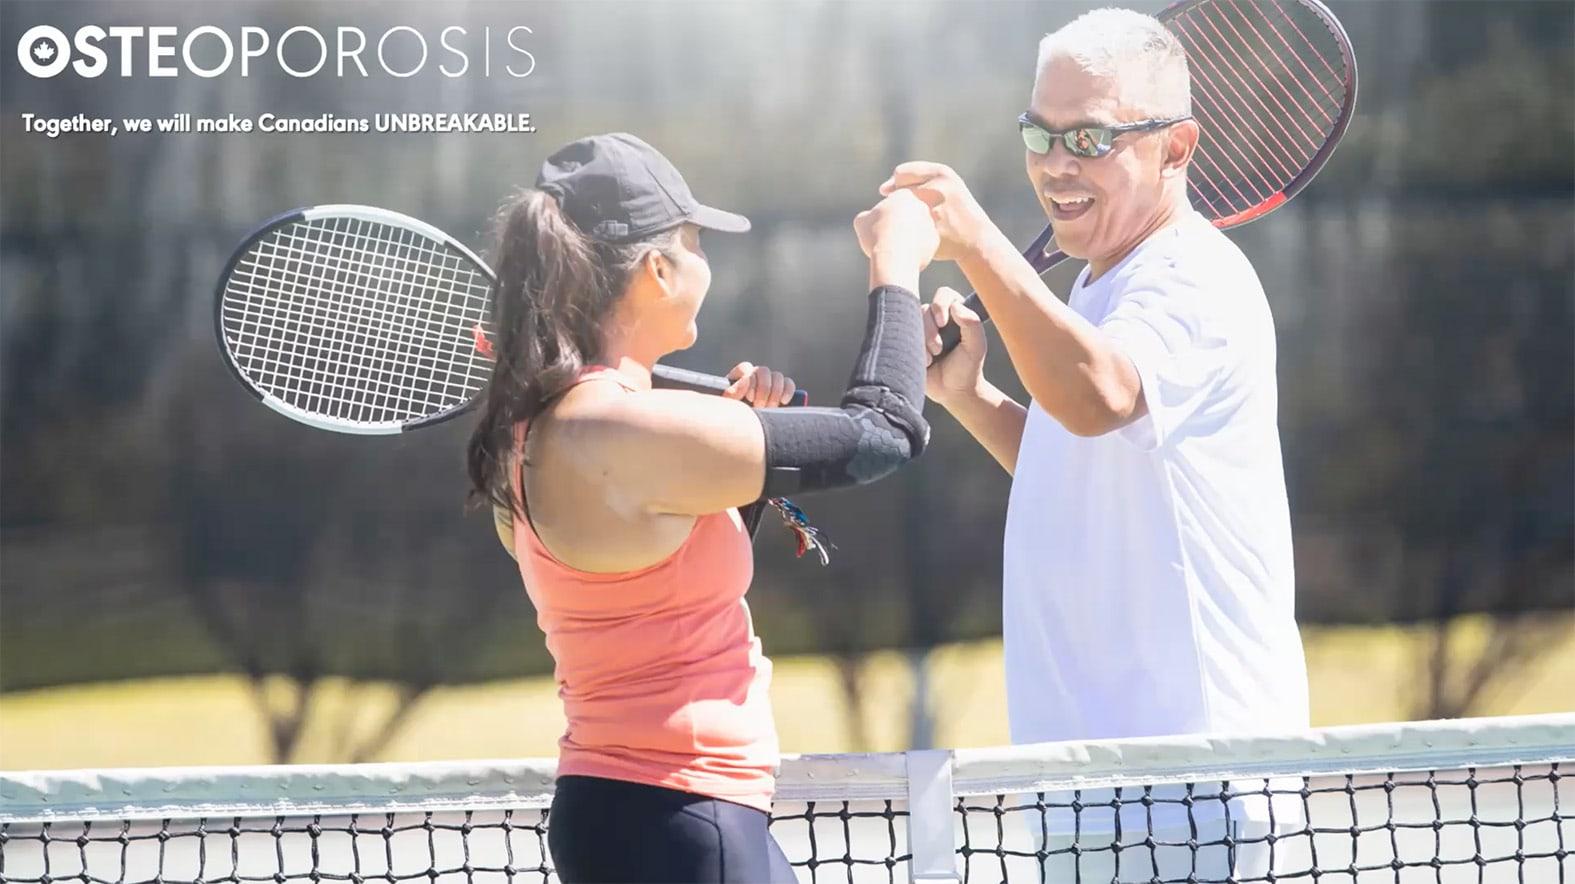 Fun in the Summertime – Staying Active with Osteoporosis